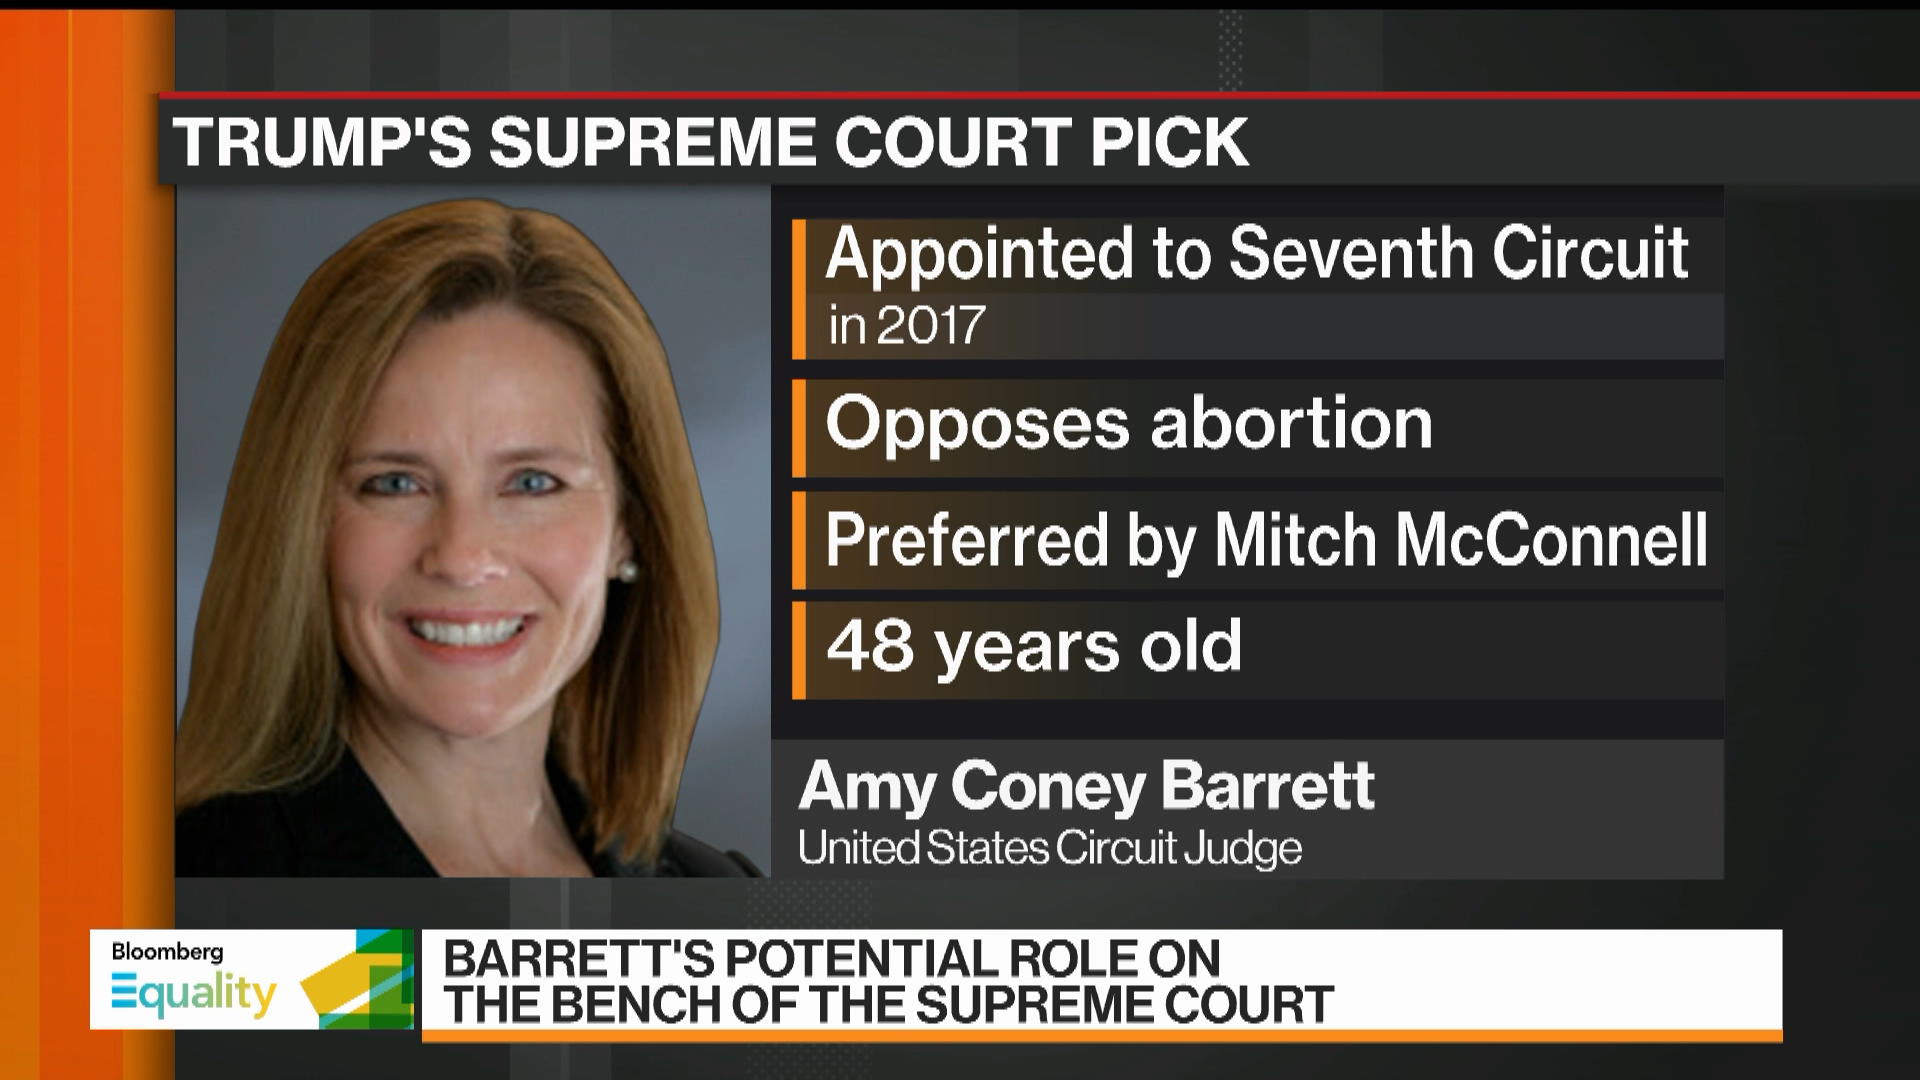 Majority says wait on the SCOTUS seat; 6 in 10 favor upholding Roe